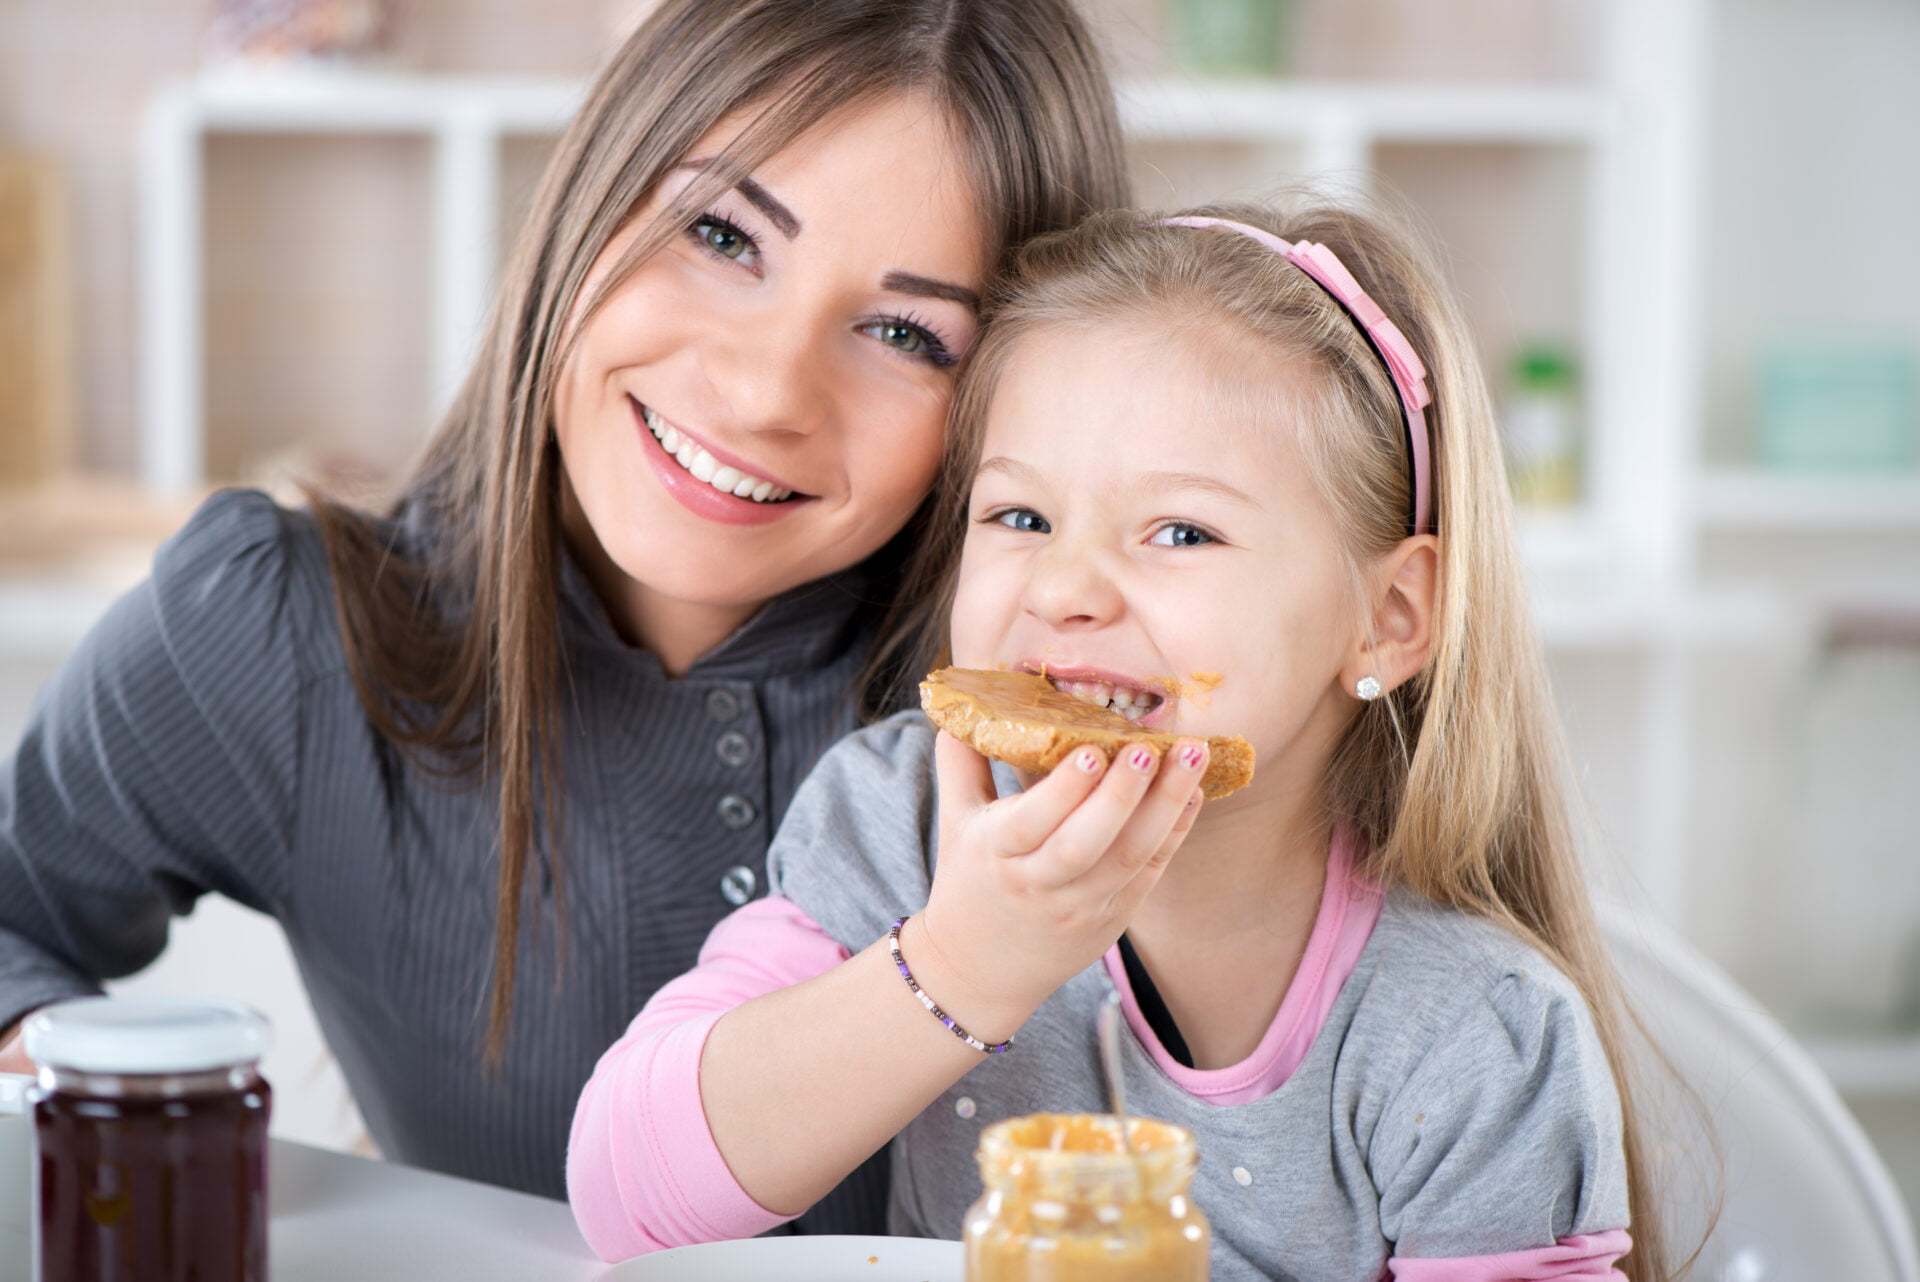 Mother and daughter breakfast in the kitchen. Cute little girl eats bread with peanut butter